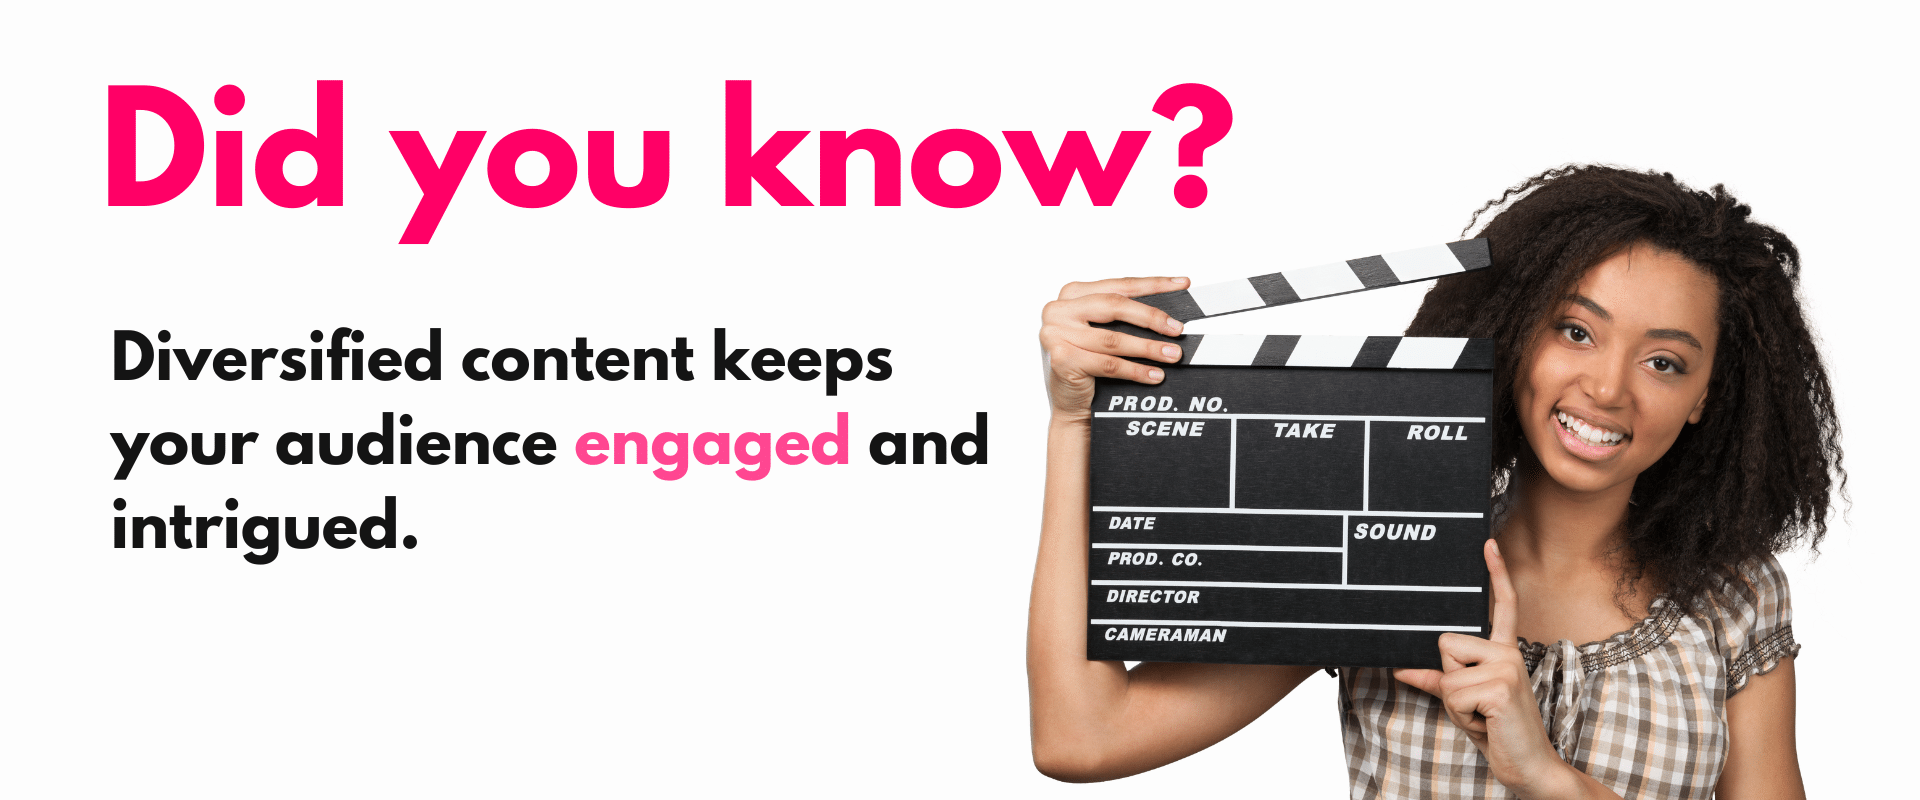 Did you know? diverse content keeps your audience and engaged.